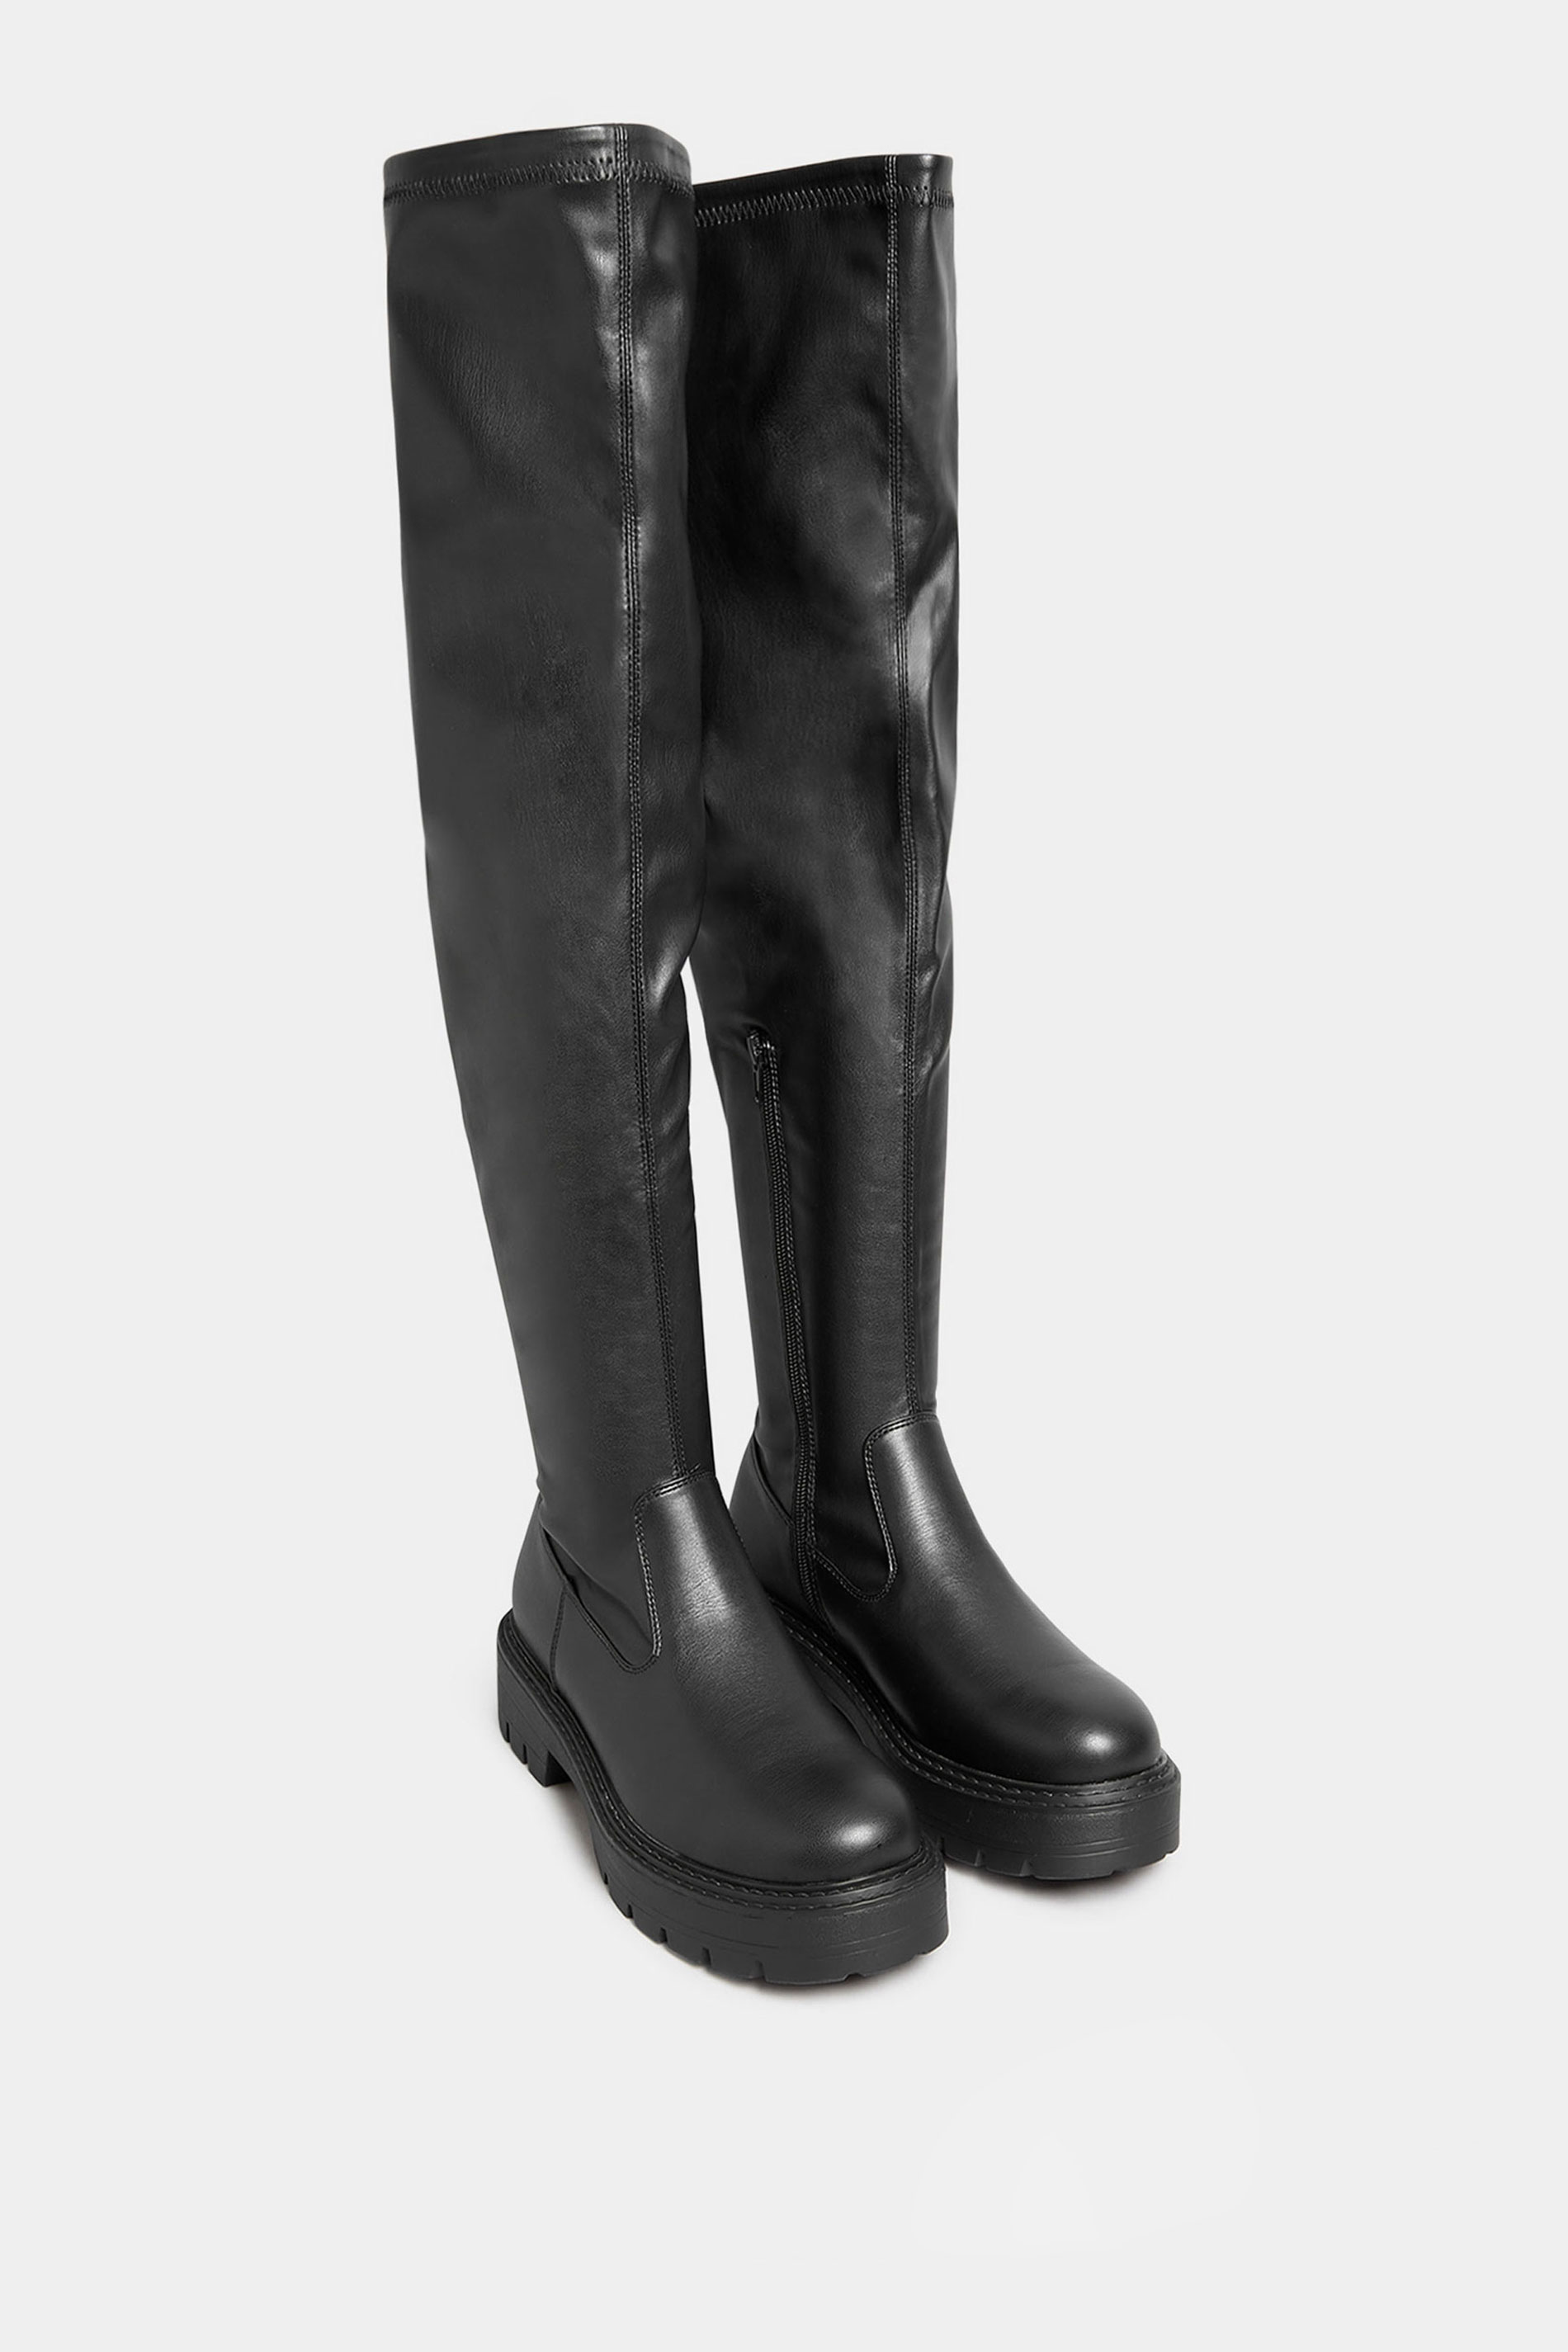 LIMITED COLLECTION Black Over The Knee Chunky Boots In Wide & Extra Wide Fit | Yours Clothing 2